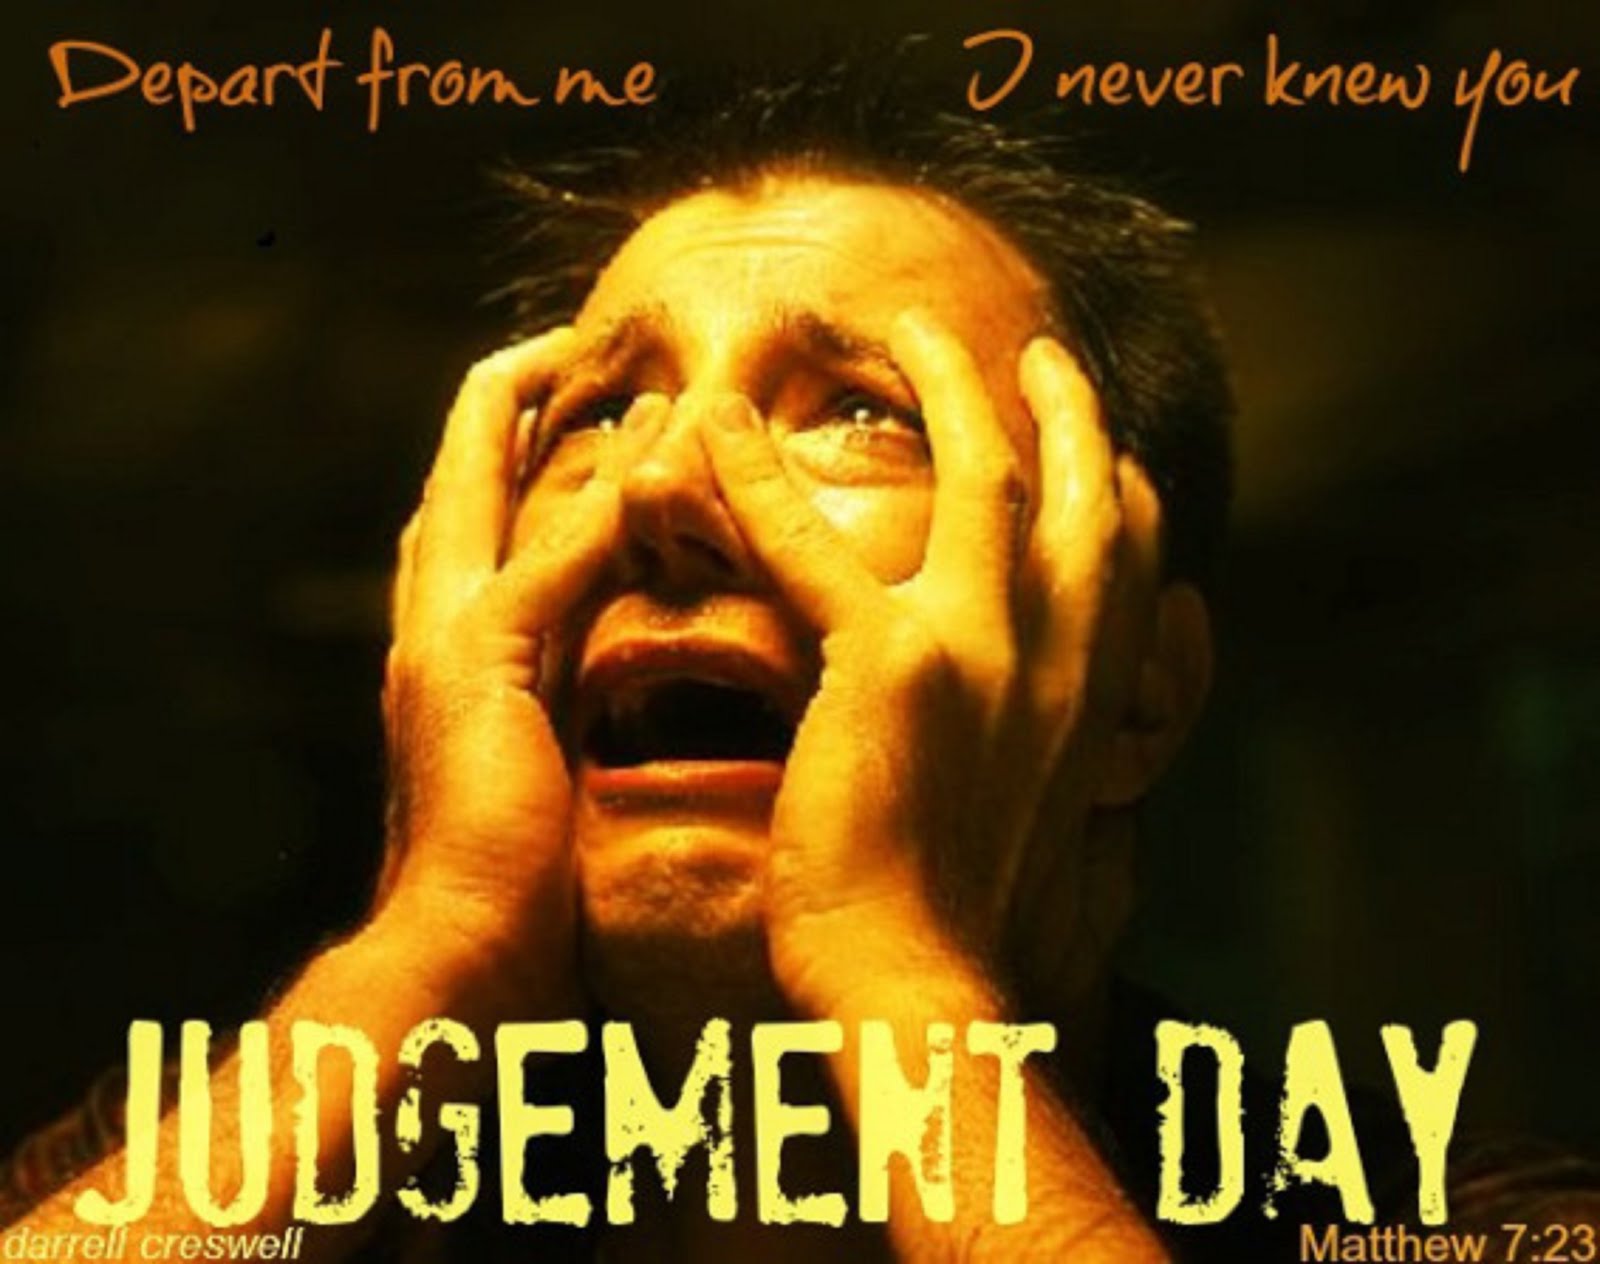 3.JUDGEMENT DAY - CHRISTIAN LADY GOES TO HELL - (INVALID SINNERS PRAYER)